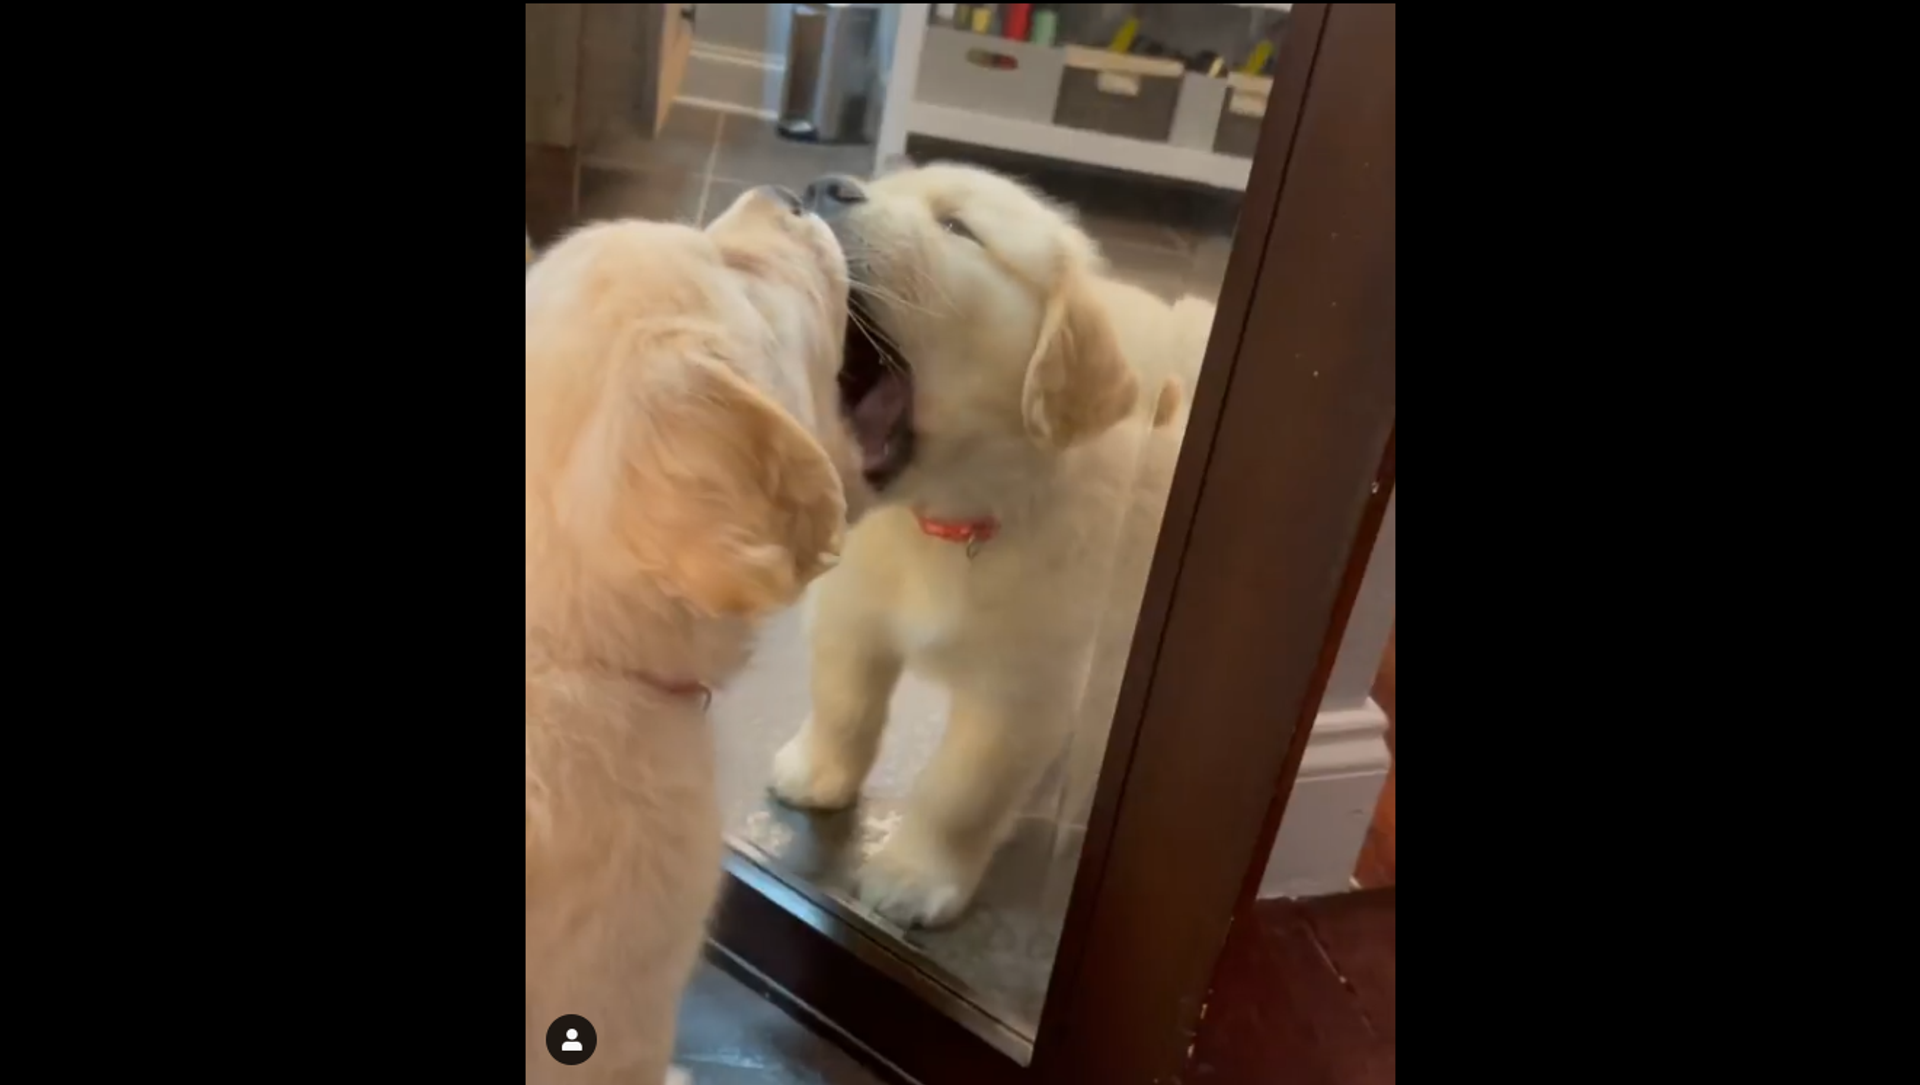 Adorable dog gets excited to see its own reflection in the mirror. Watch